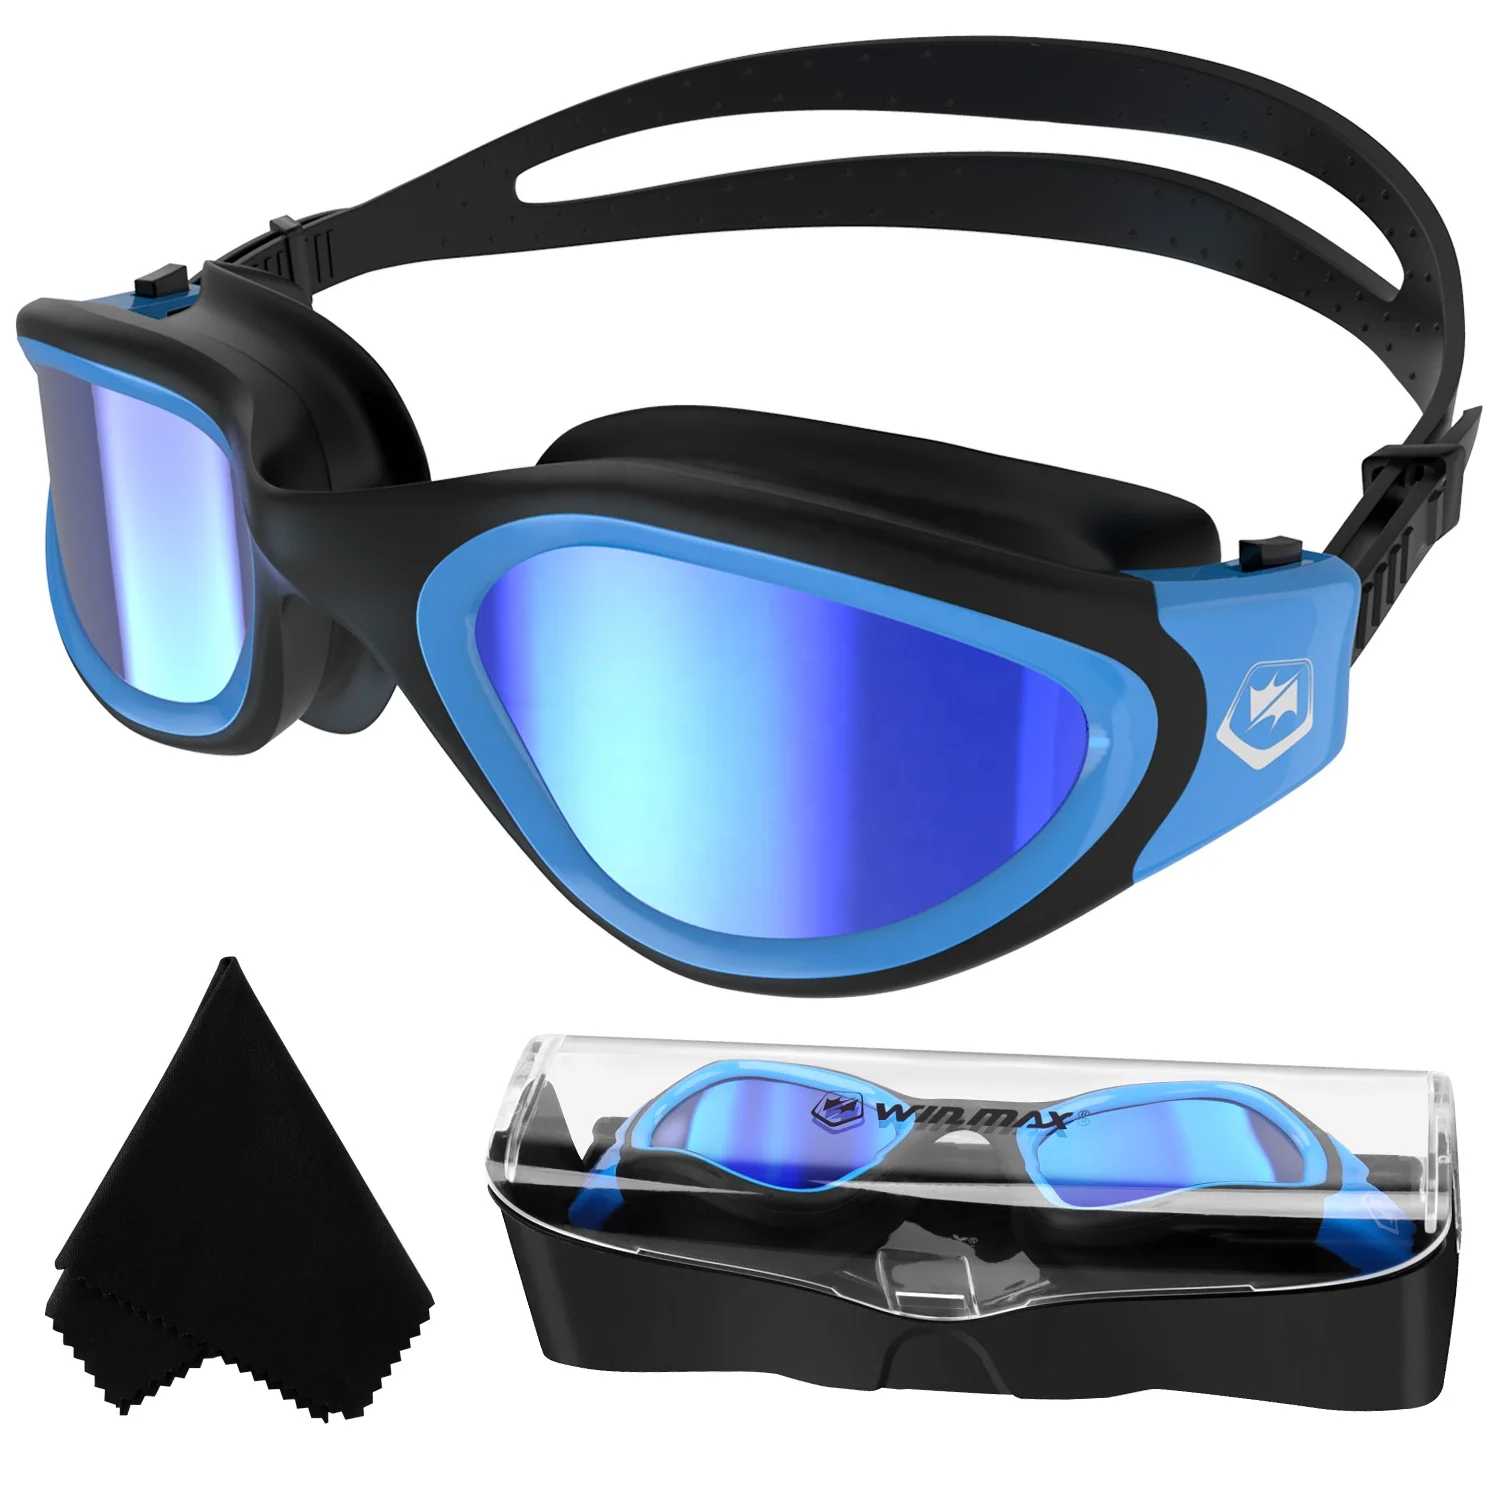 

WINMAX anti-fog UV protection, adults, teenagers, waterproof, clear view, easy to adjust Polarised swimming goggles glasses, Blue&black/blue polarized mirrored lens